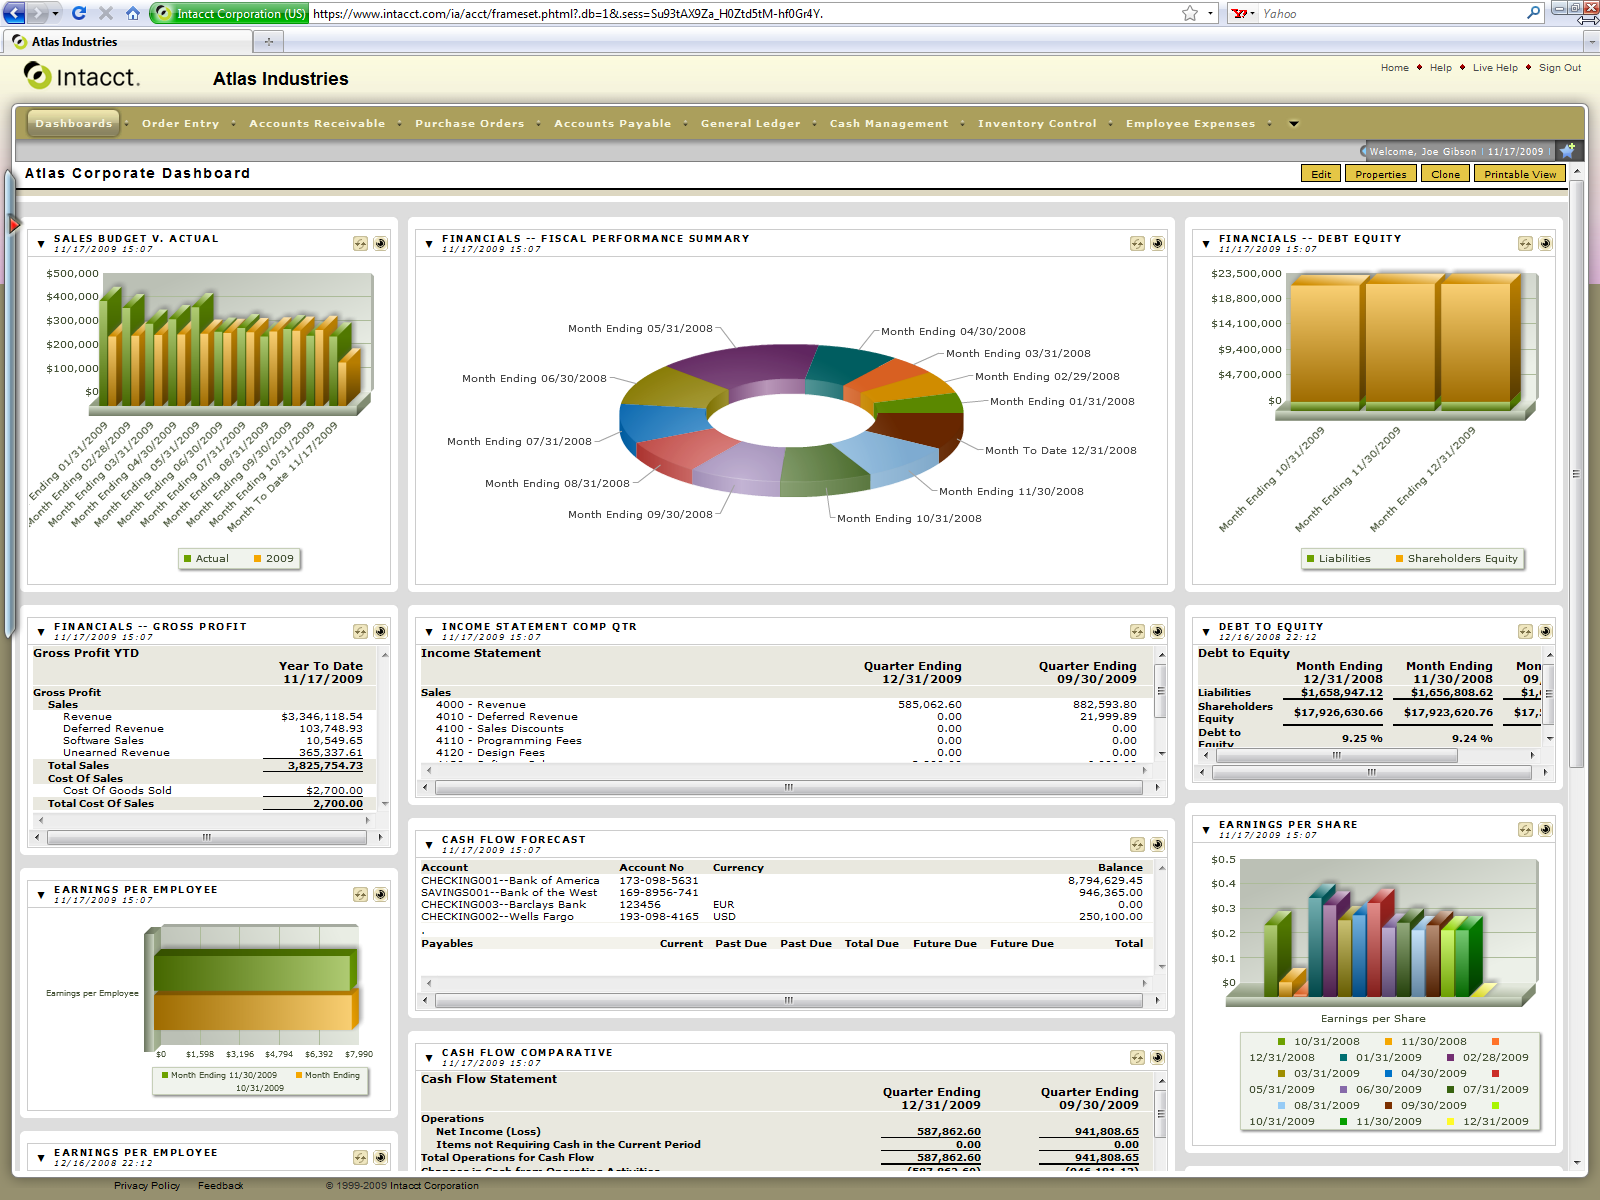 Product Brief Intacct Financials & Accounting Intacct Financials and Accounting includes Intacct General Ledger, Intacct Accounts Receivable, Intacct Accounts Payable, Intacct Cash Management and